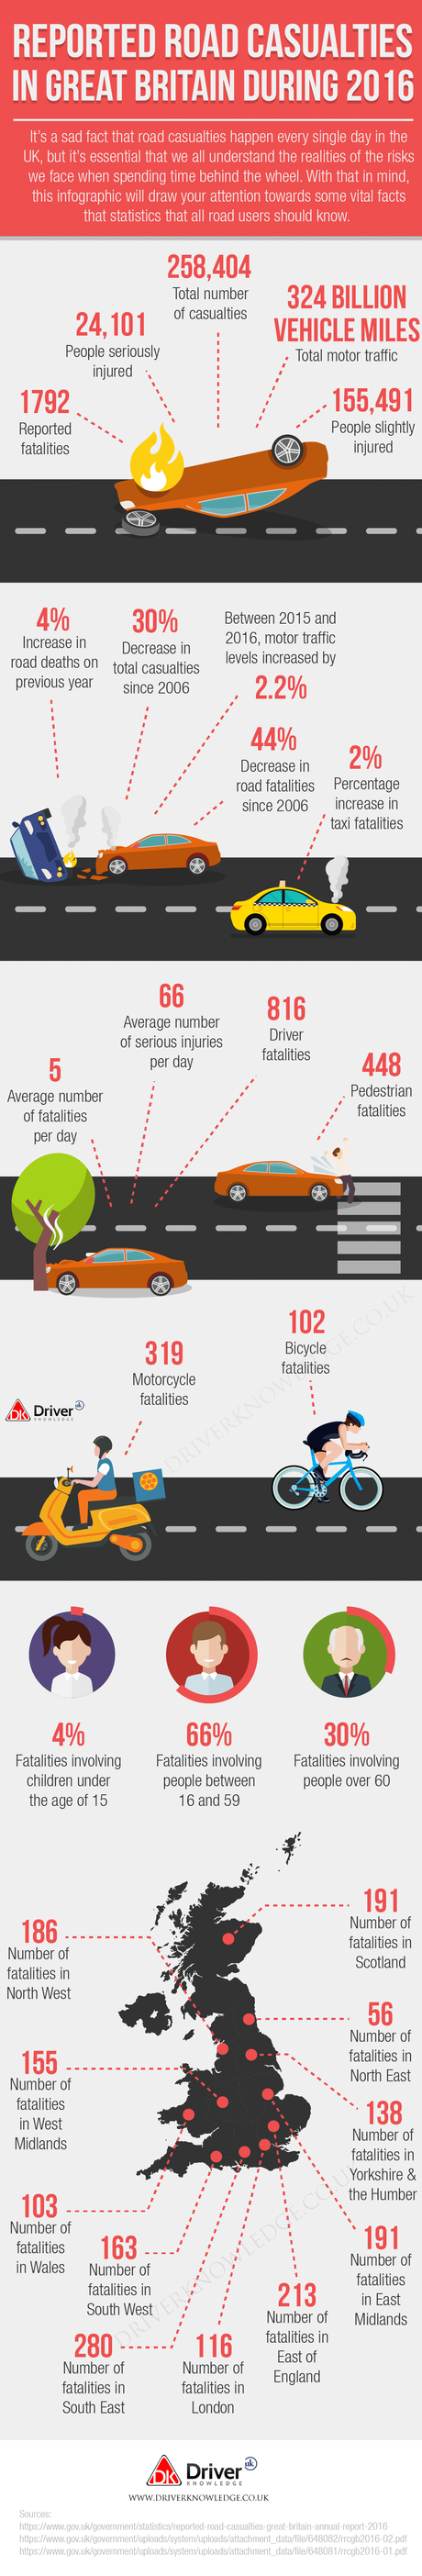 Reported Road Casualties in Great Britain infographic